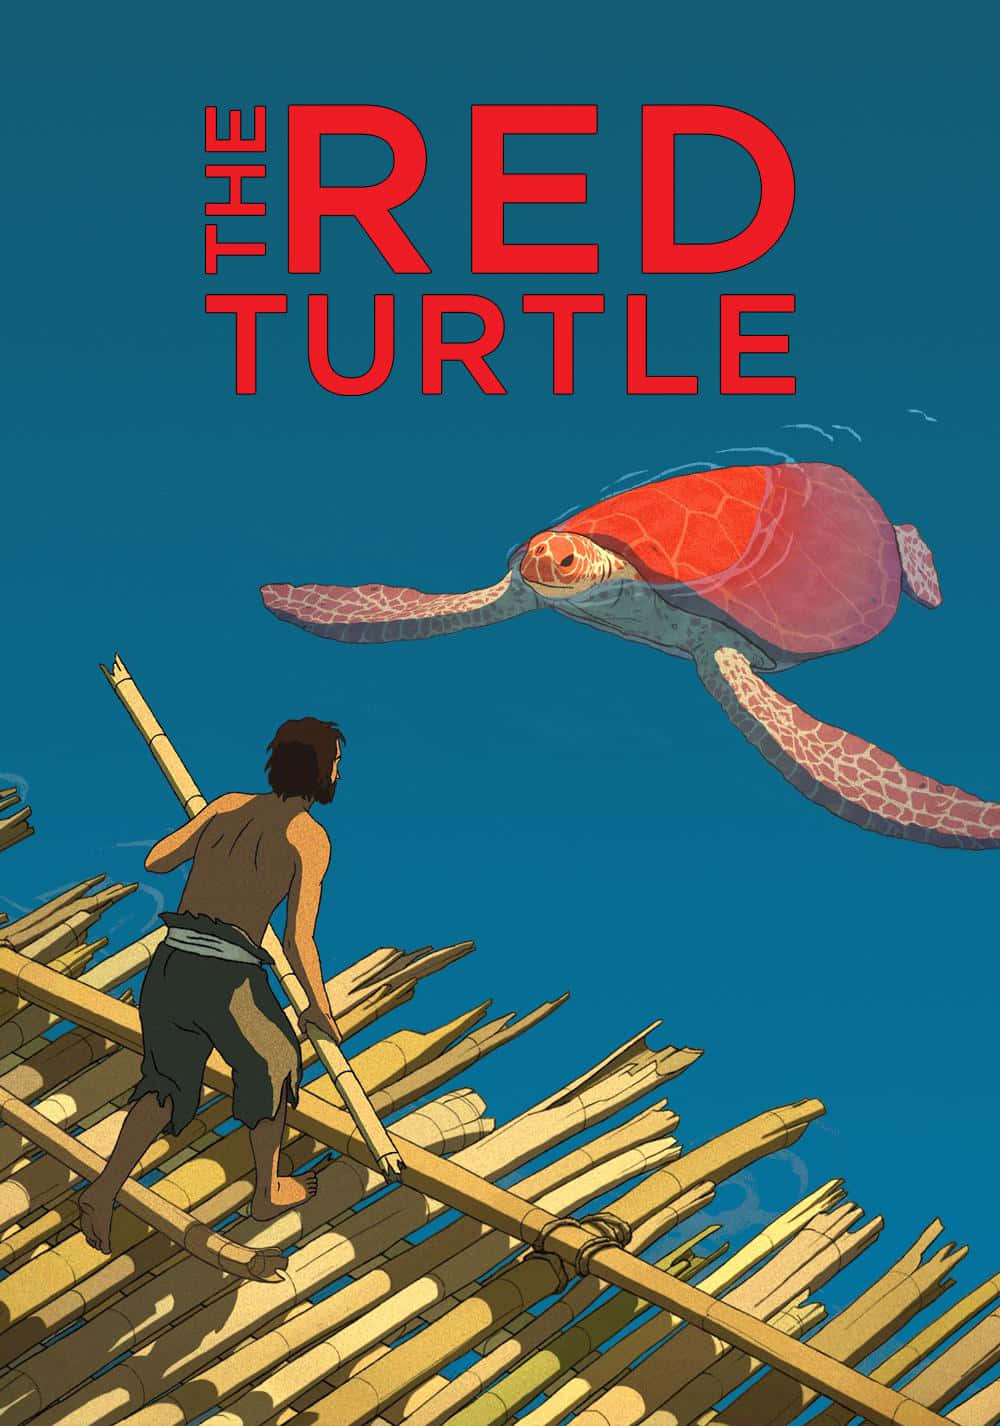 The Red Turtle Movie Poster Wallpaper